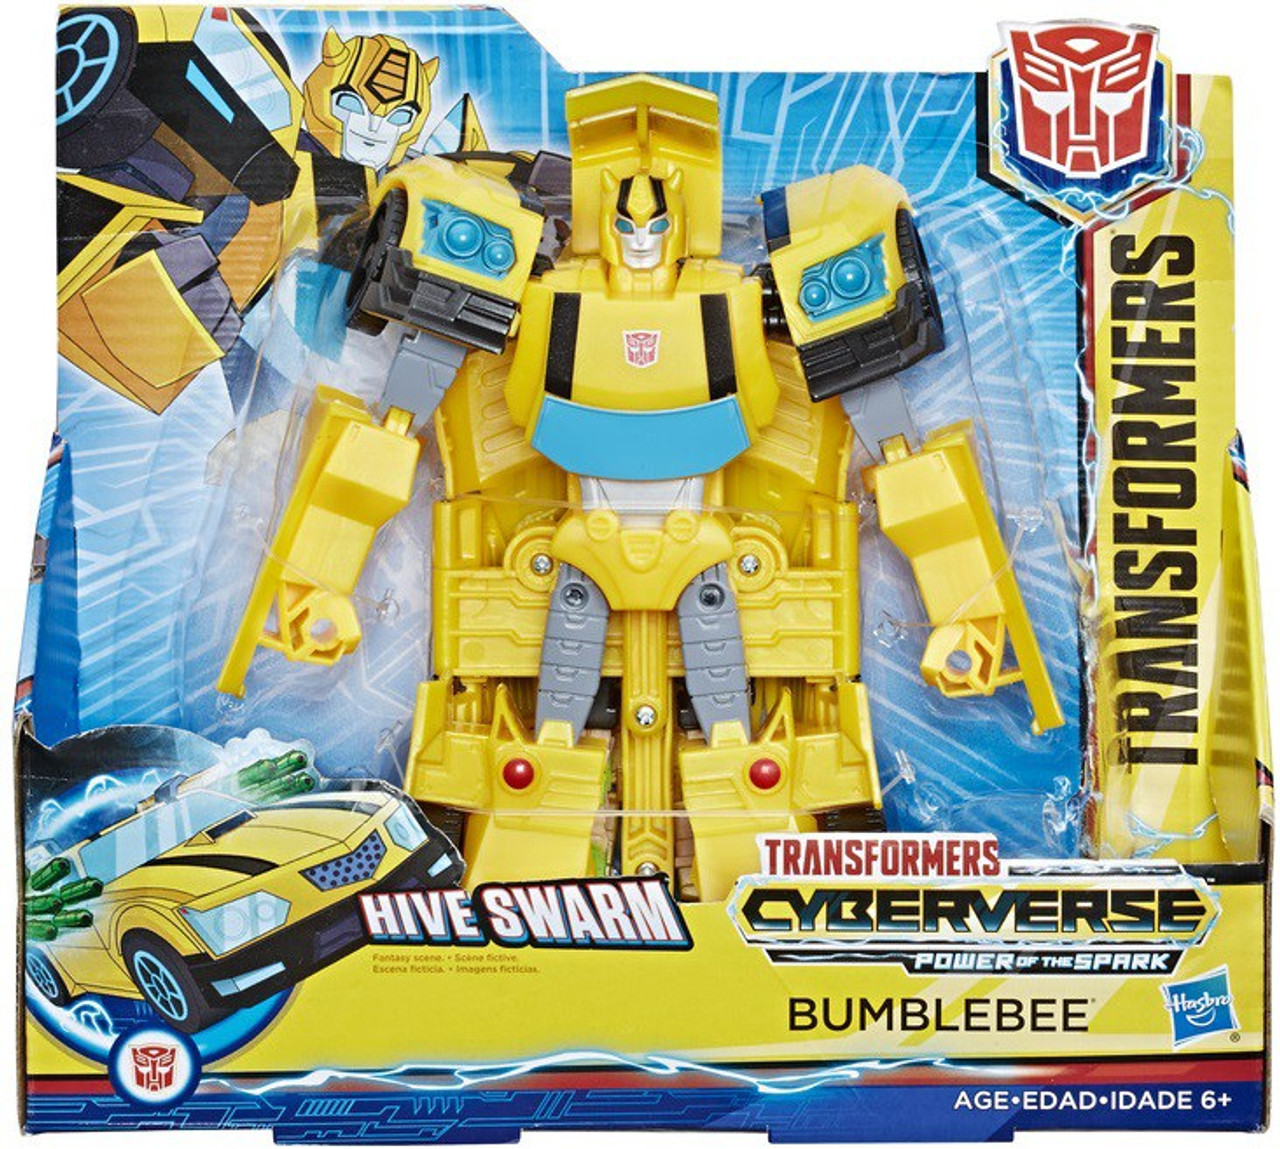 Transformers Cyberverse Power of the Spark Bumblebee Ultra